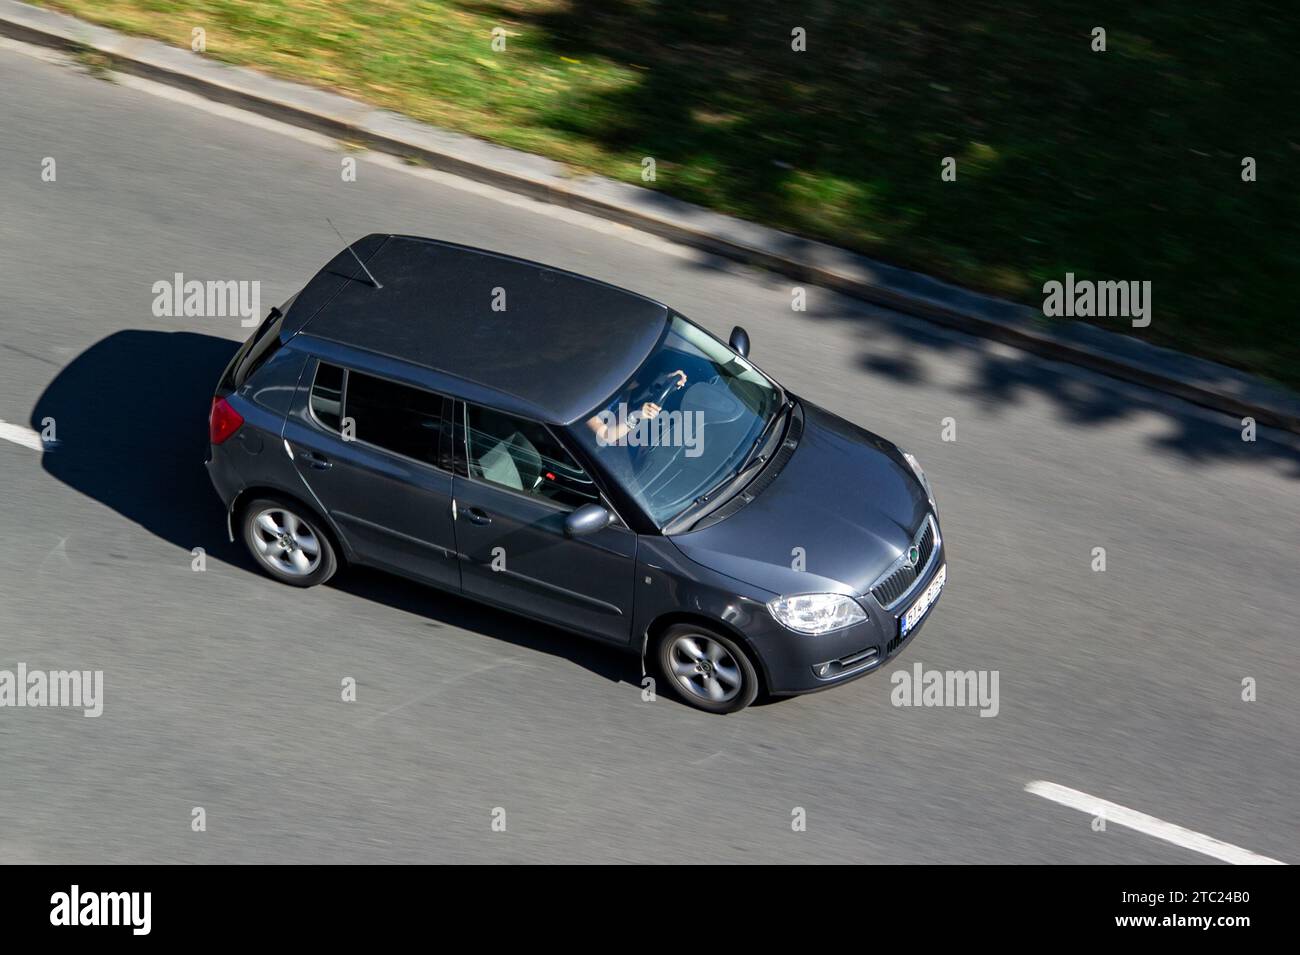 OSTRAVA, CZECH REPUBLIC - AUGUST 24, 2023: Silver Skoda Fabia II vehicle with motion blur effect in top view Stock Photo